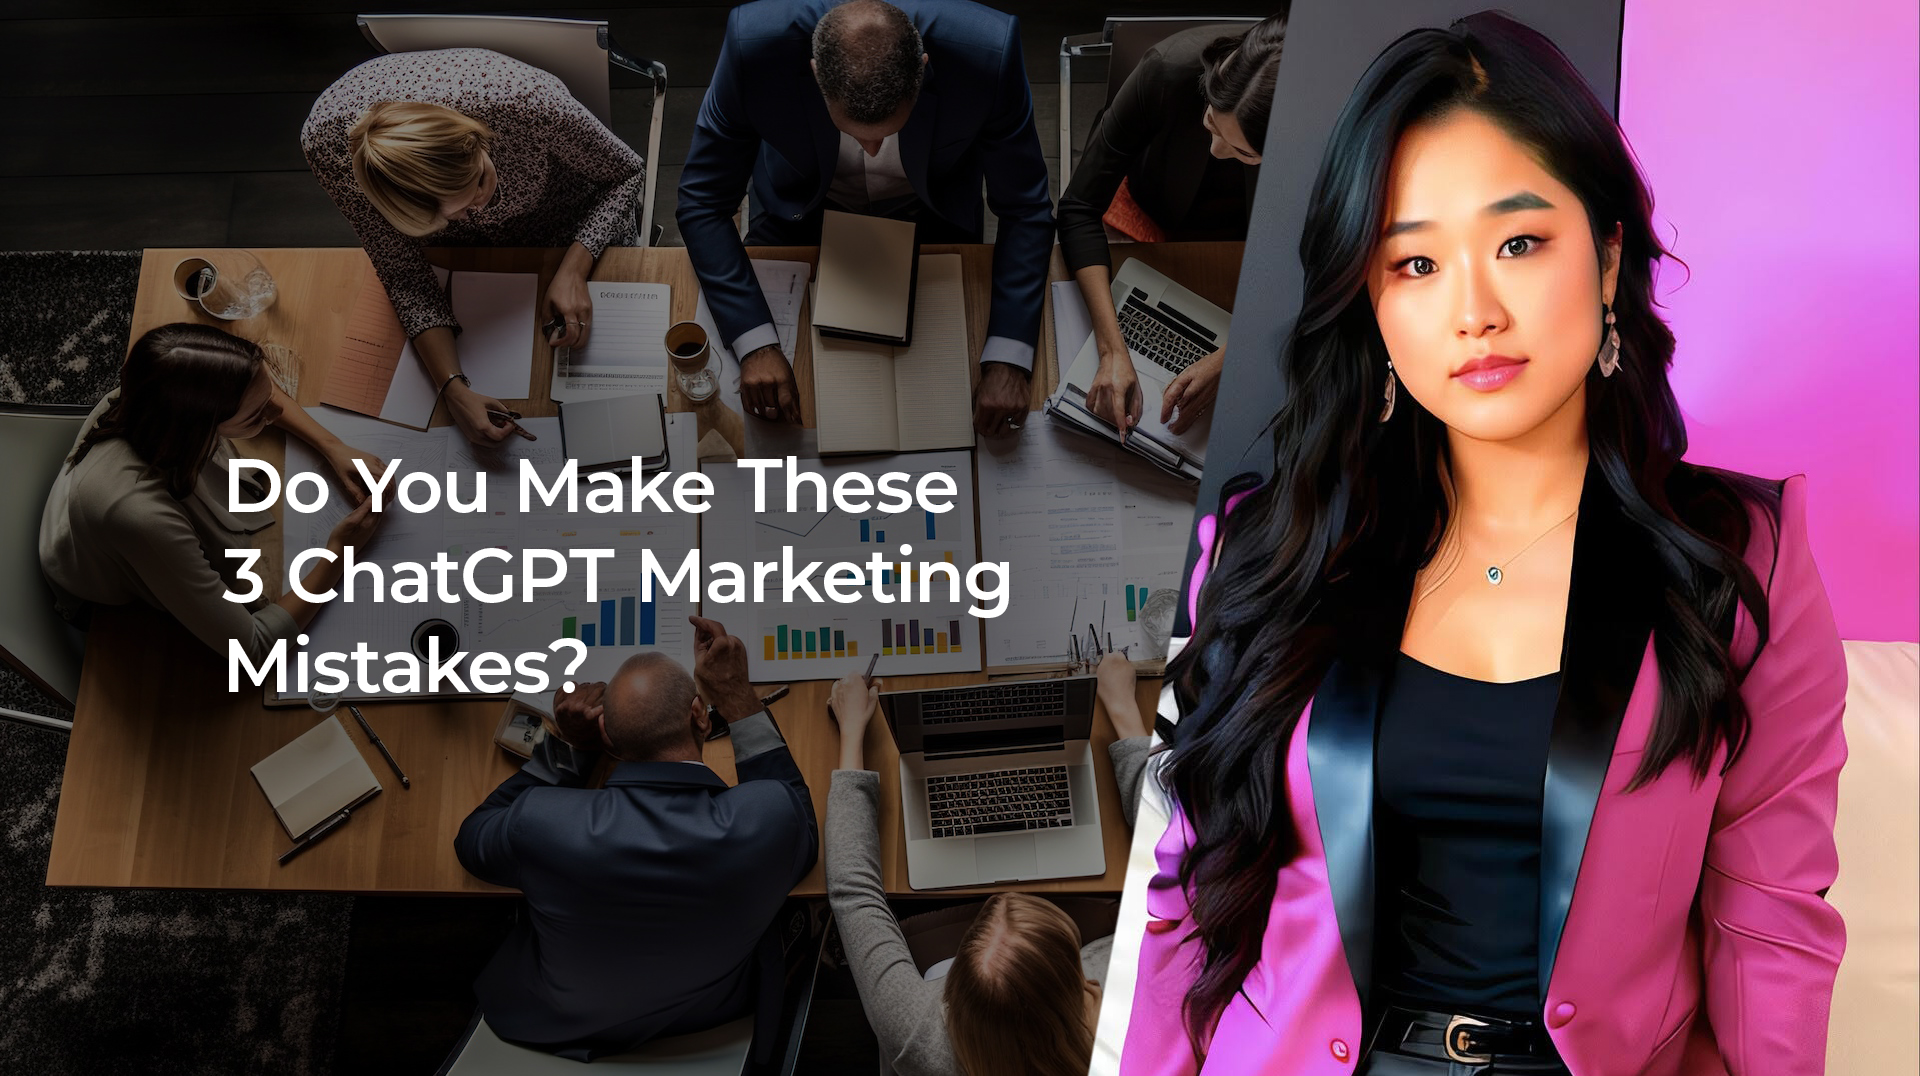 3 ChatGPT Marketing Mistakes